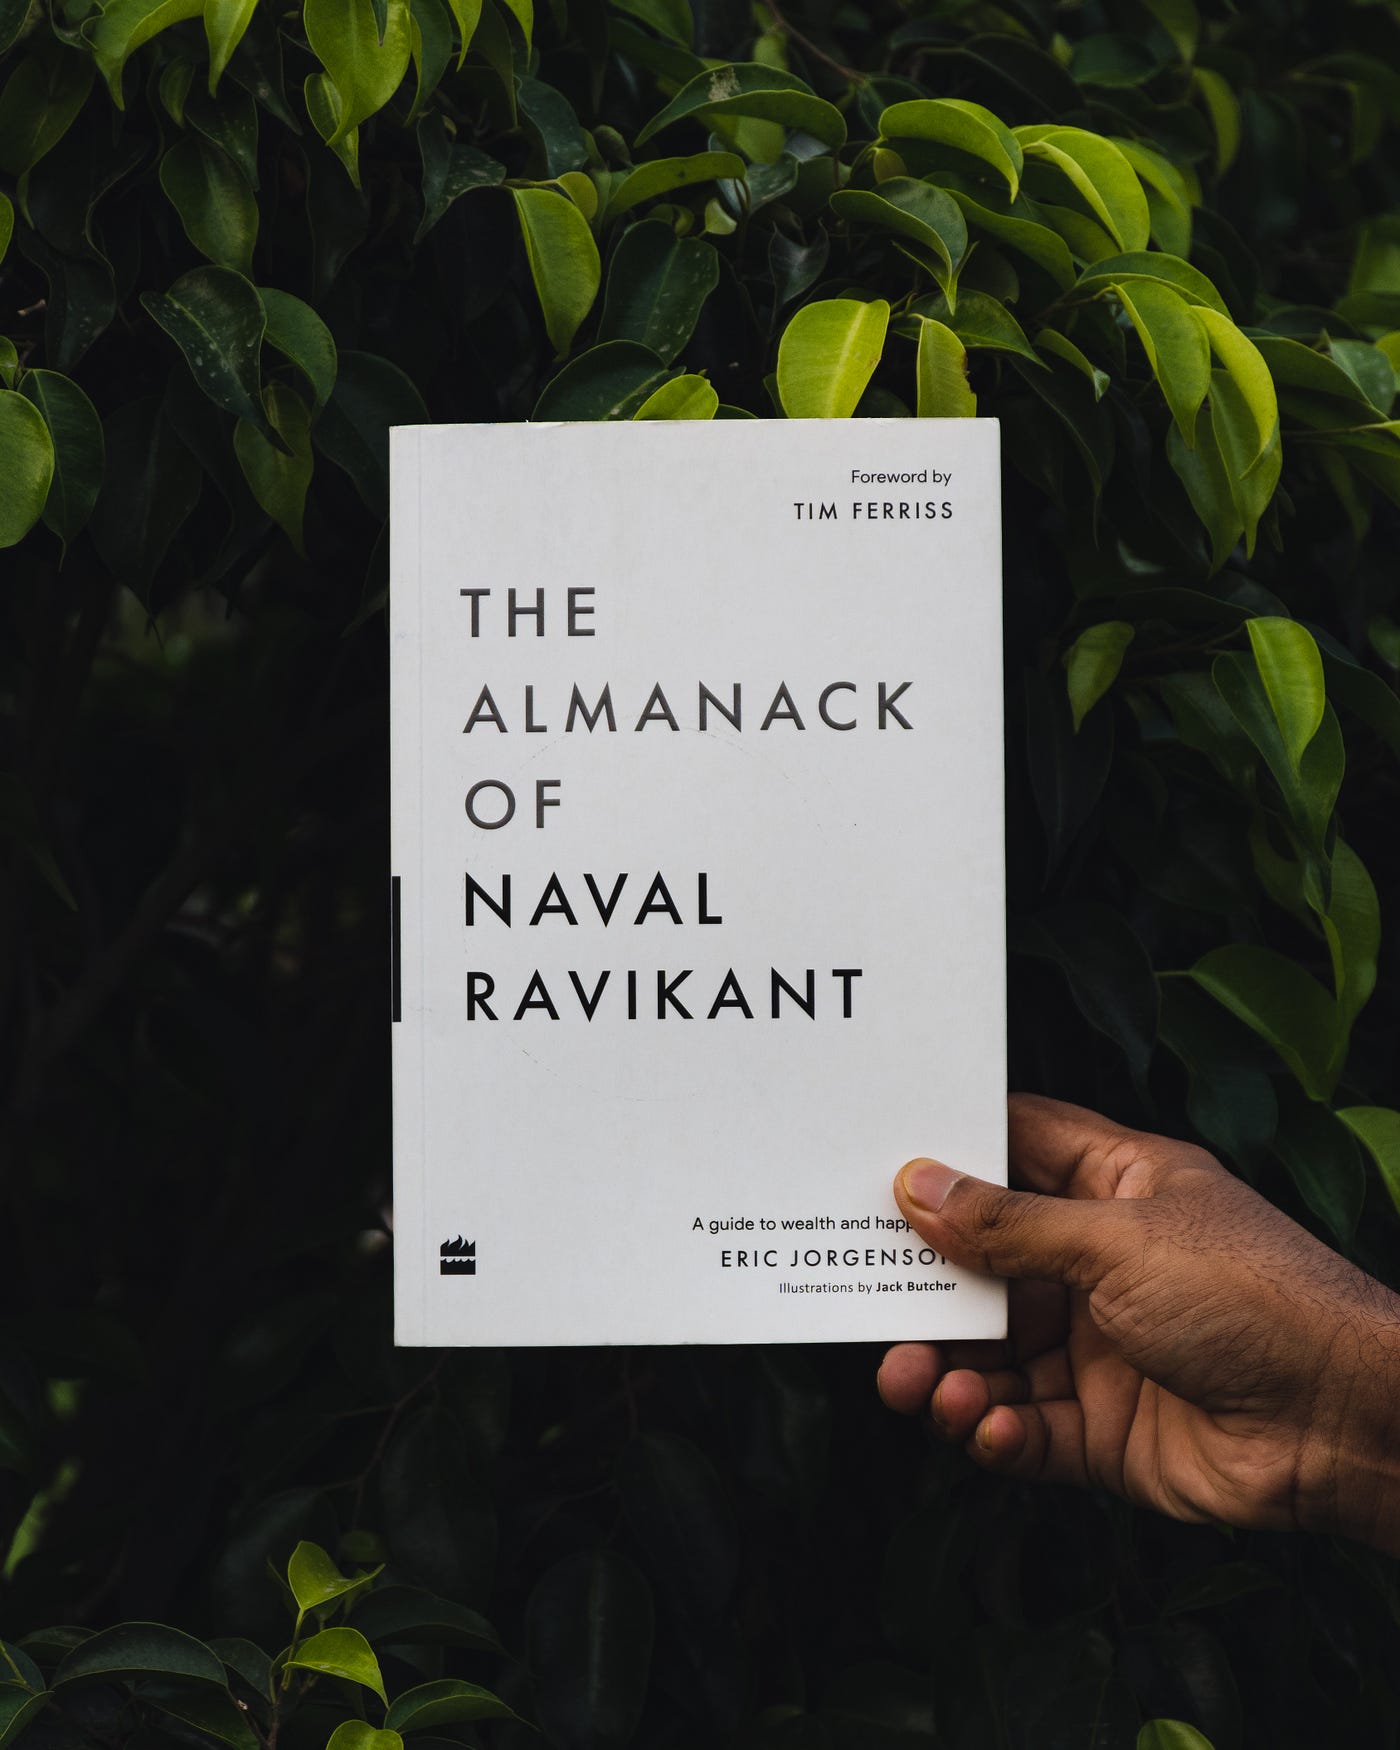 The Almanack of Naval Ravikant. Getting rich is not just about